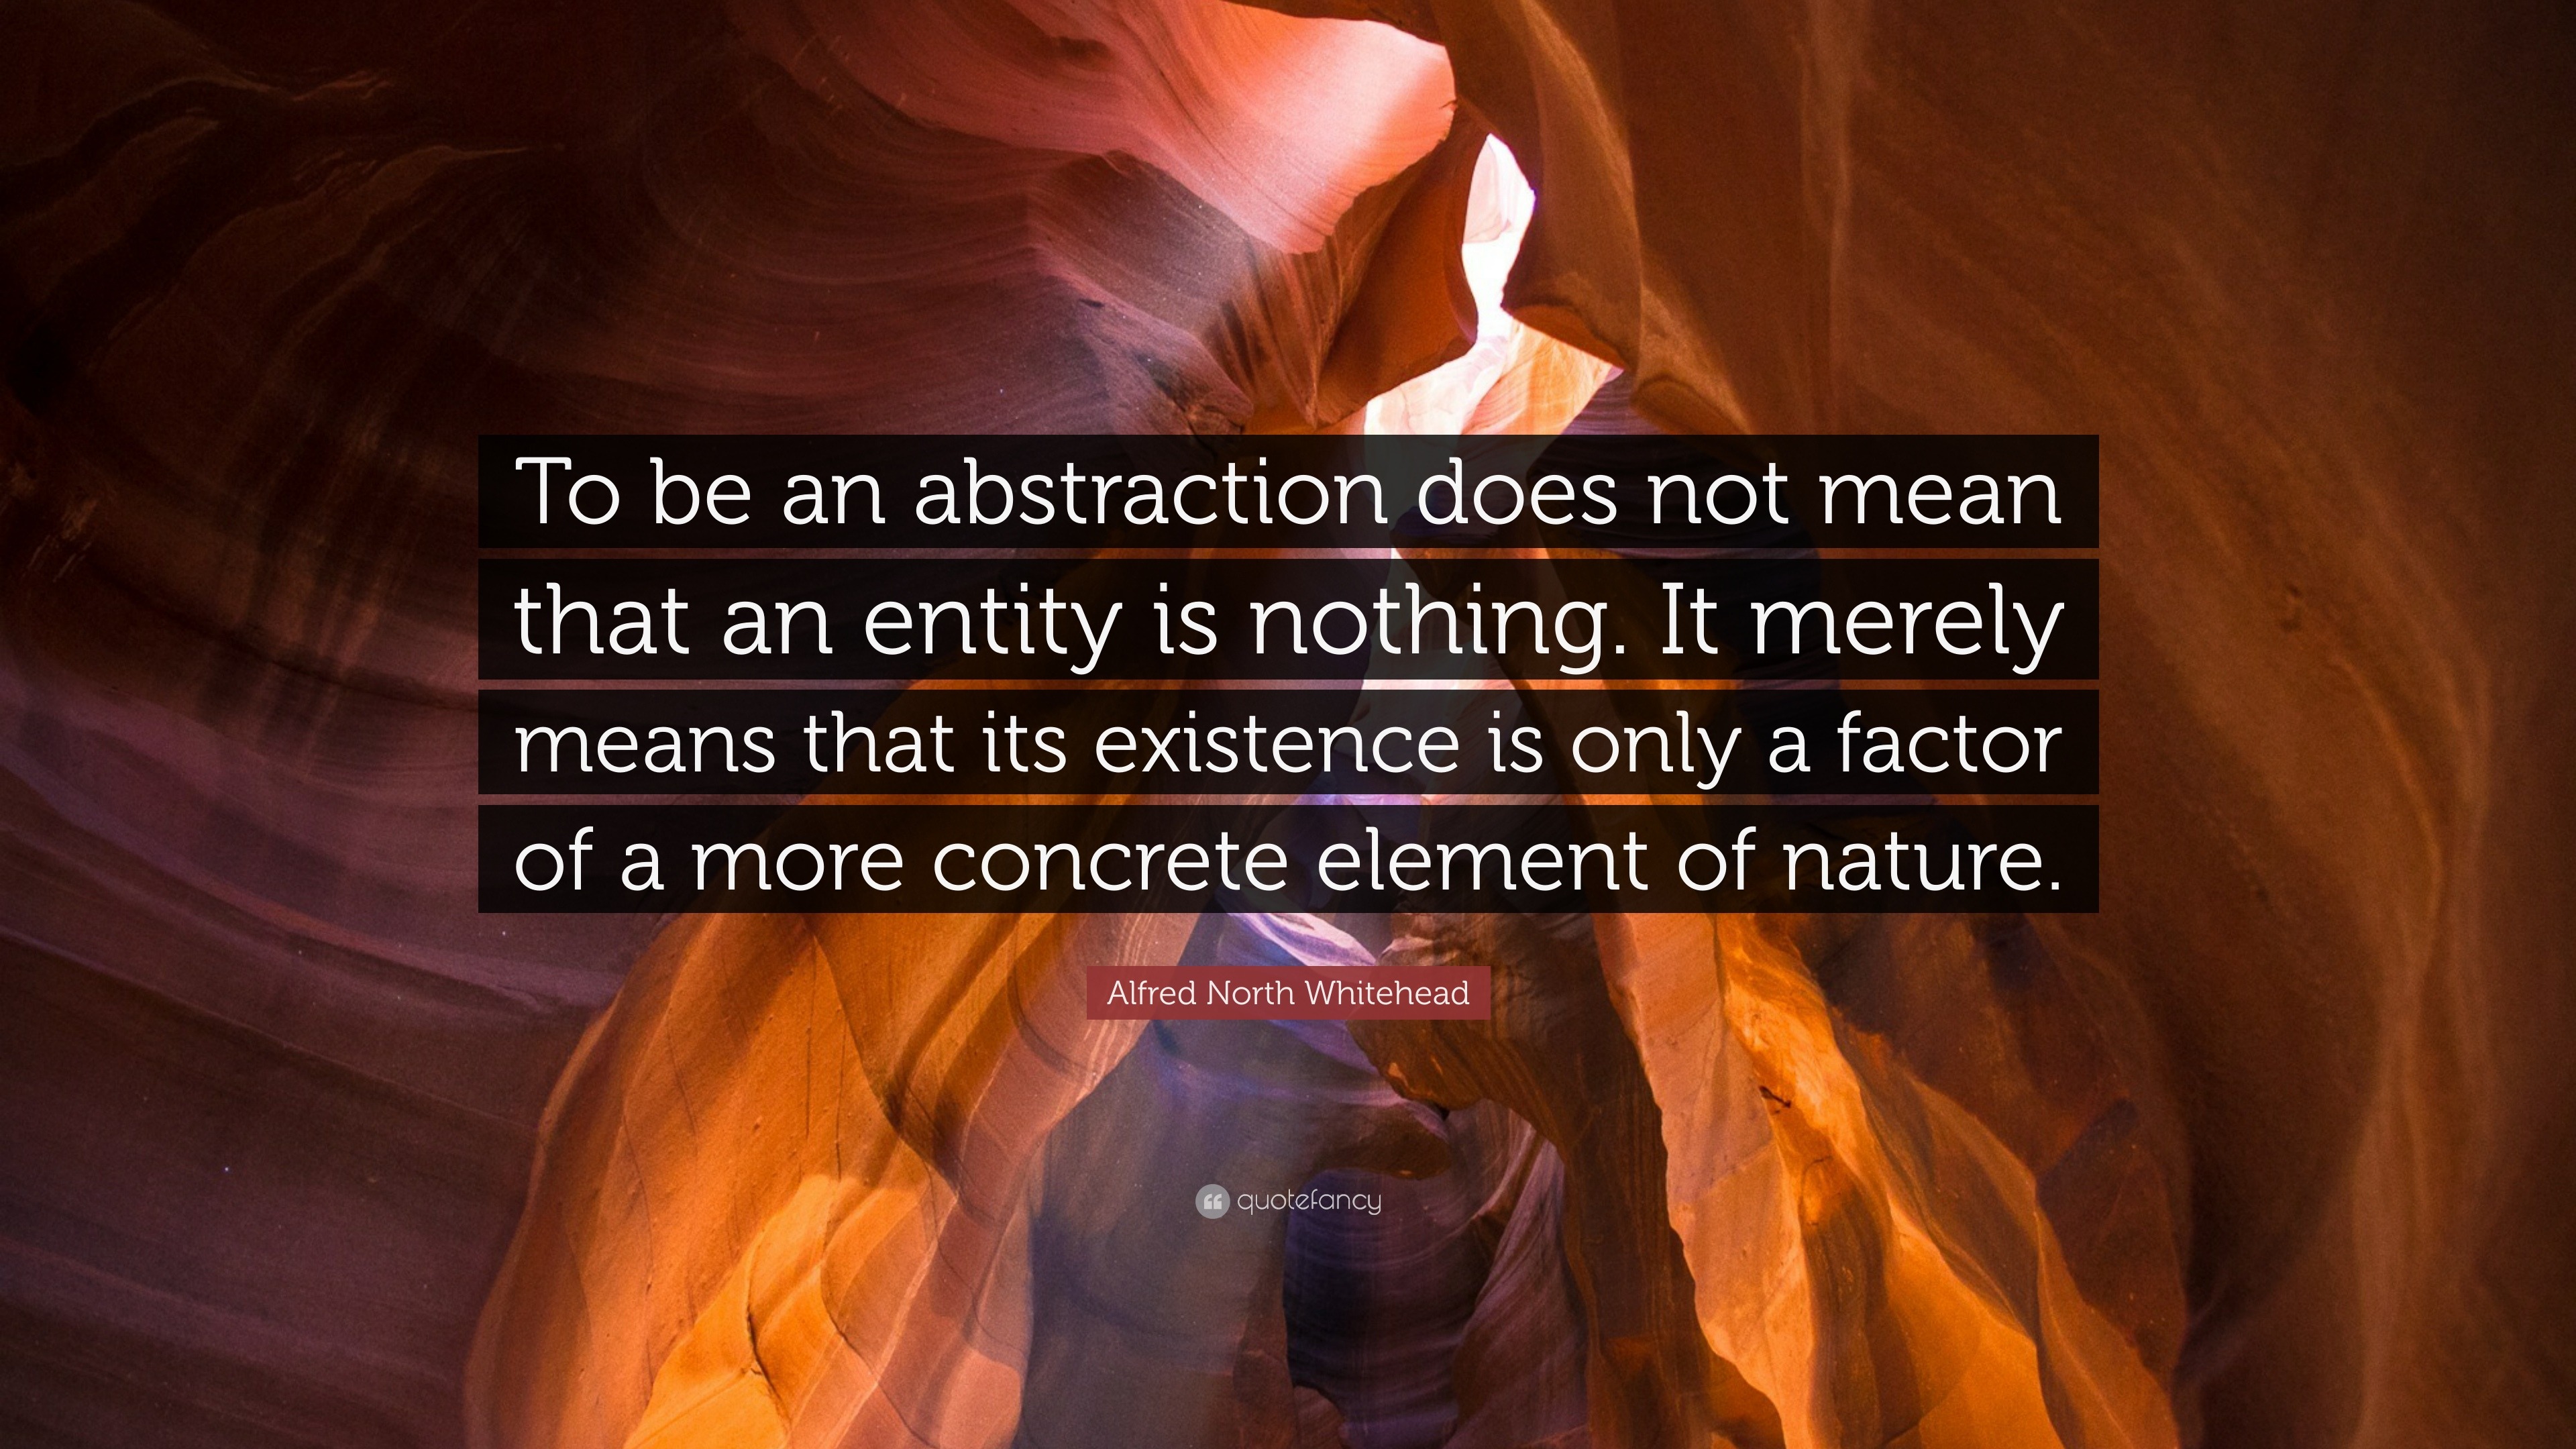 Alfred North Whitehead Quote: “To be an abstraction does not mean that an  entity is nothing. It merely means that its existence is only a factor of a  m”